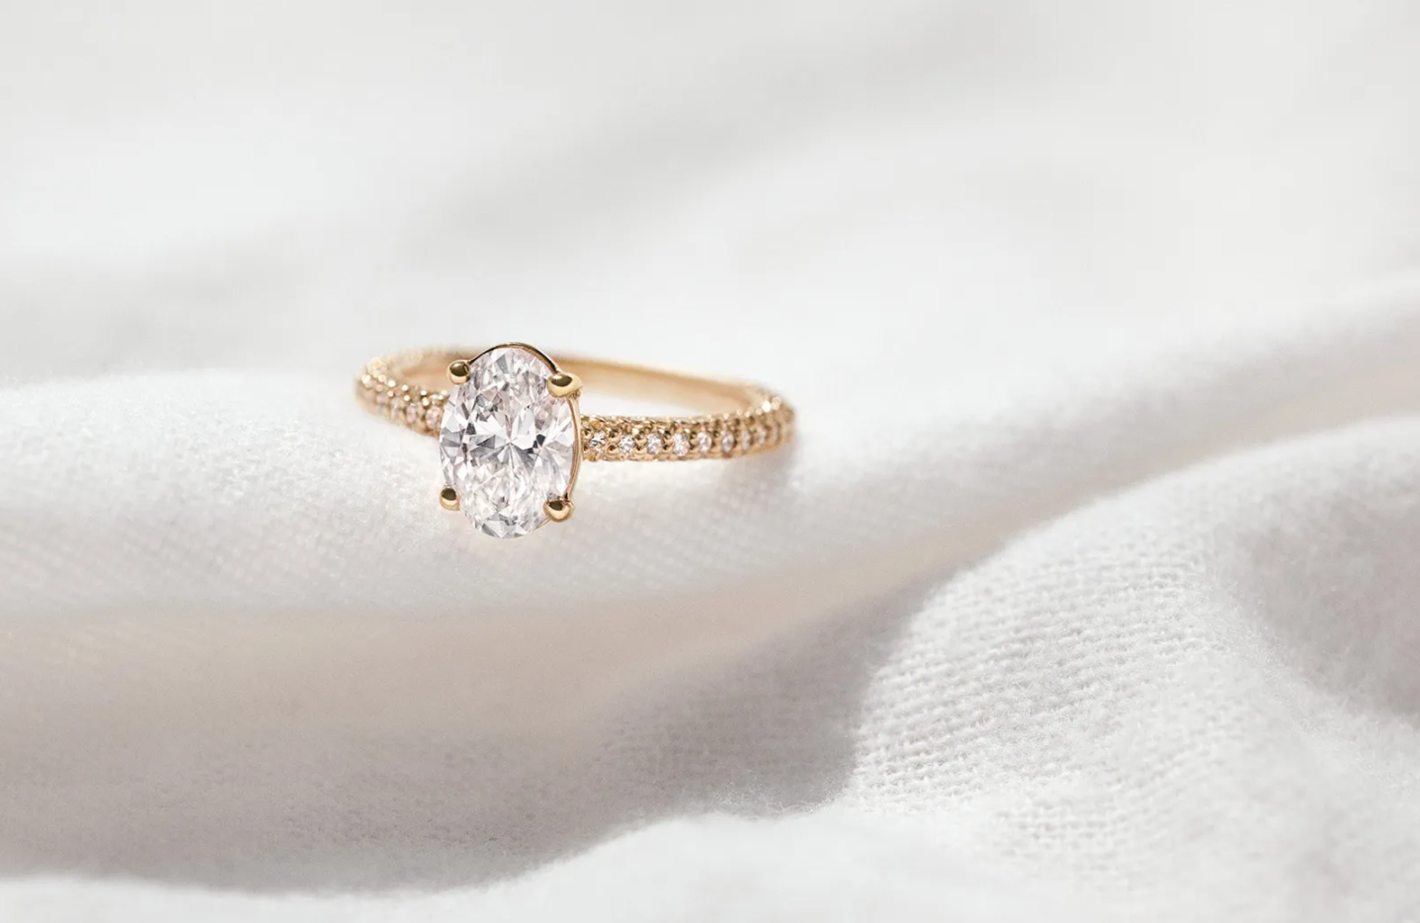 What Is the Average Engagement Ring Cost? - Learn